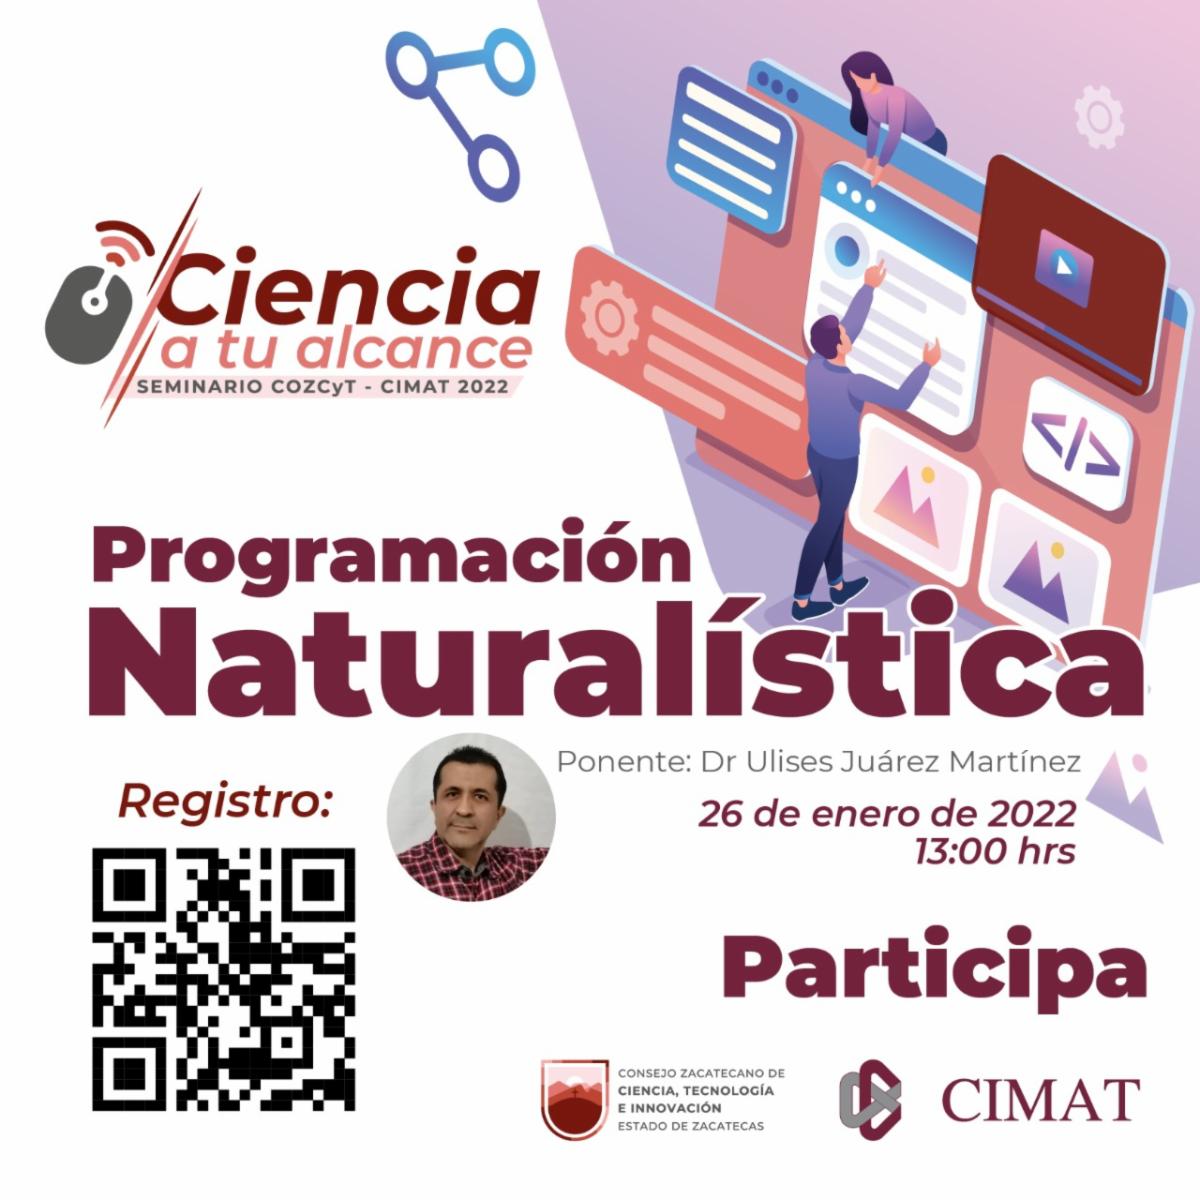 Invites the Zacatecas State Government to participate in the Cozcyt-CIMAT Science Symposium at your fingertips